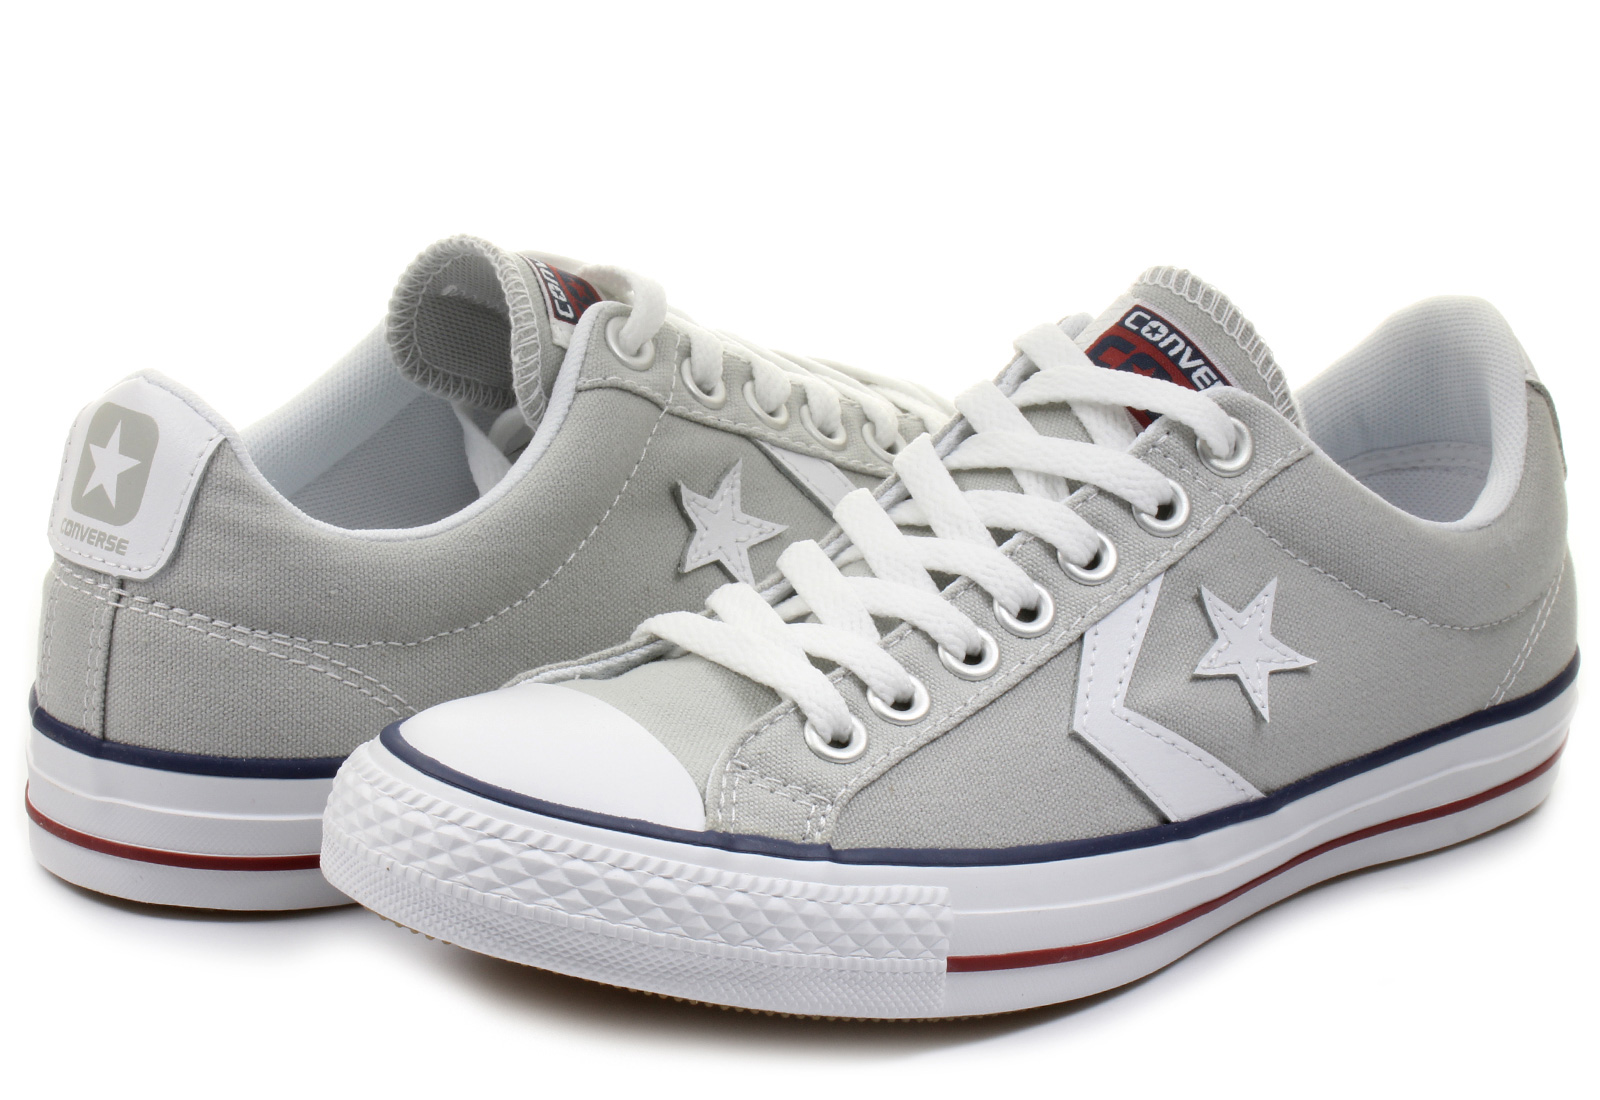 Sentirse mal cafetería Escarchado Converse Sneakers - Star Player Ev Ox - 136929C - Online shop for sneakers,  shoes and boots